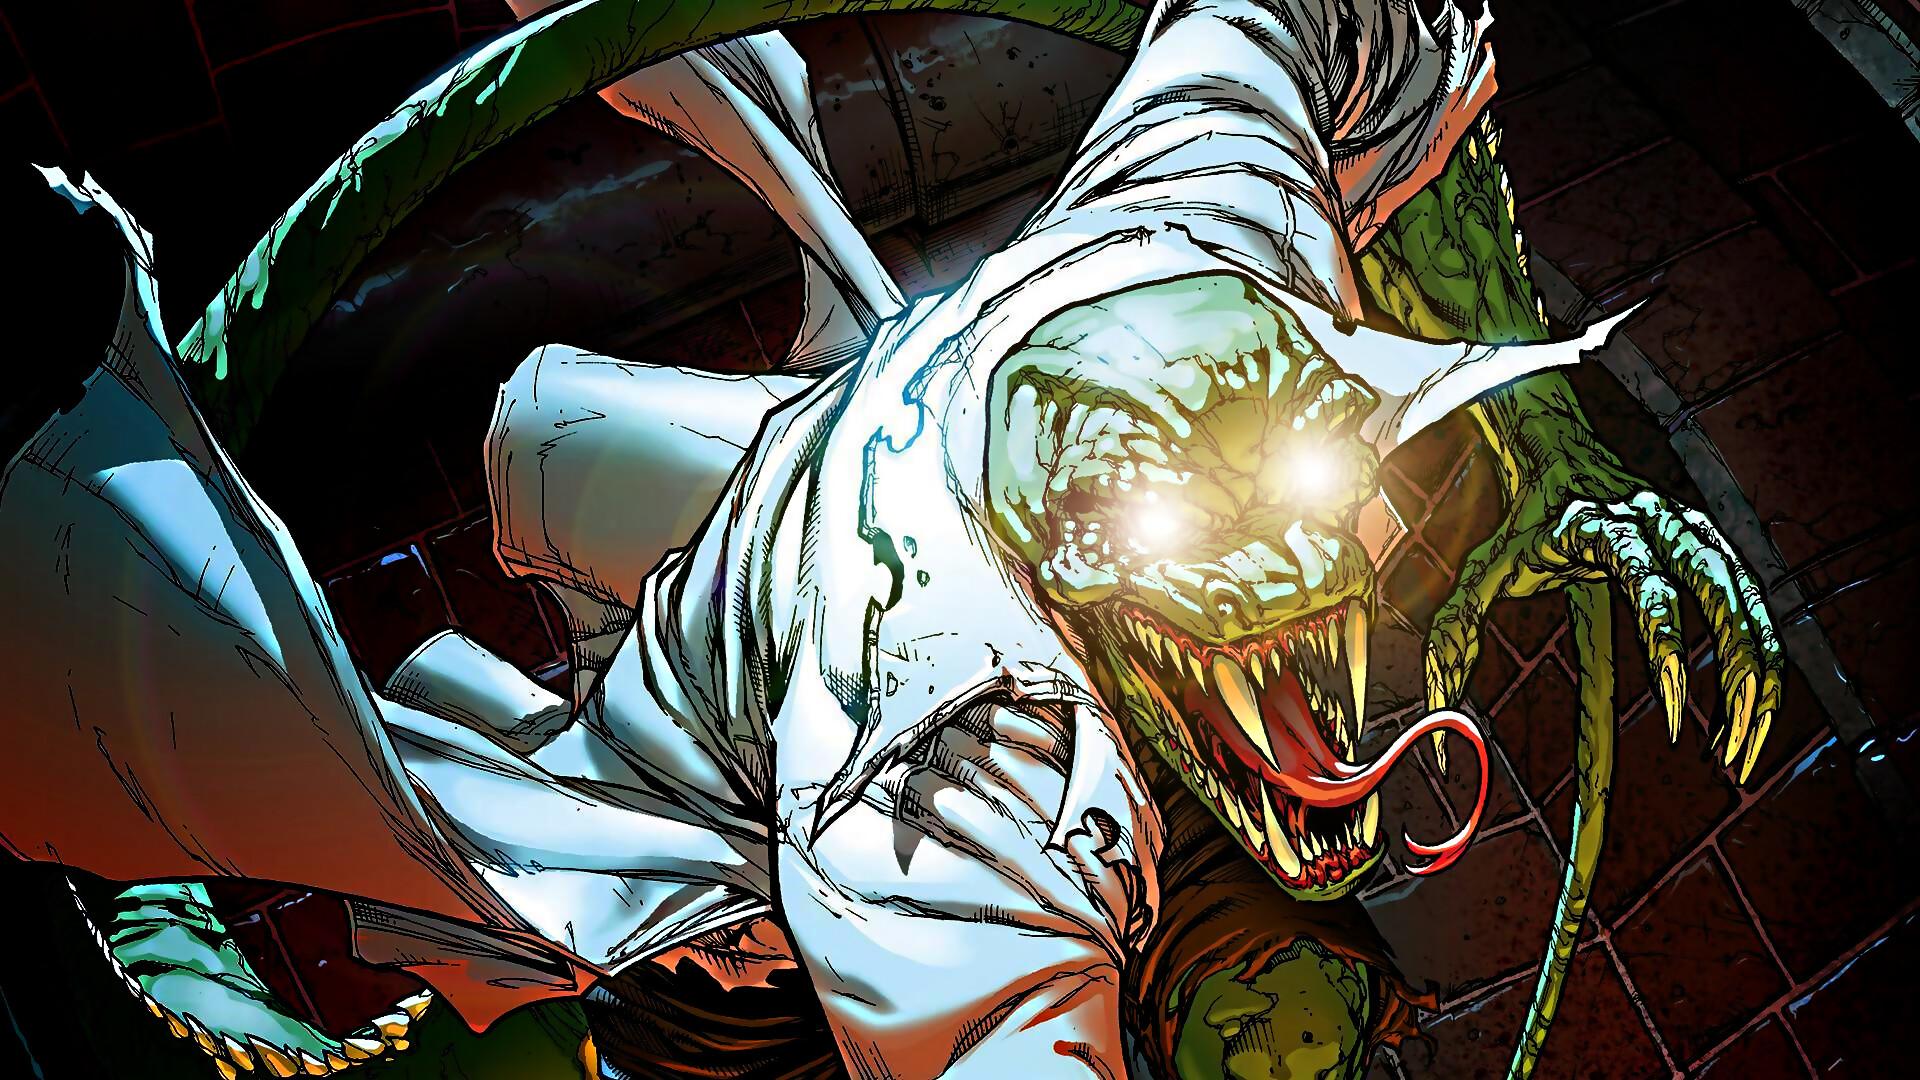 Killer Croc: A supervillain appearing in American comic books published by DC Comics. 1920x1080 Full HD Wallpaper.